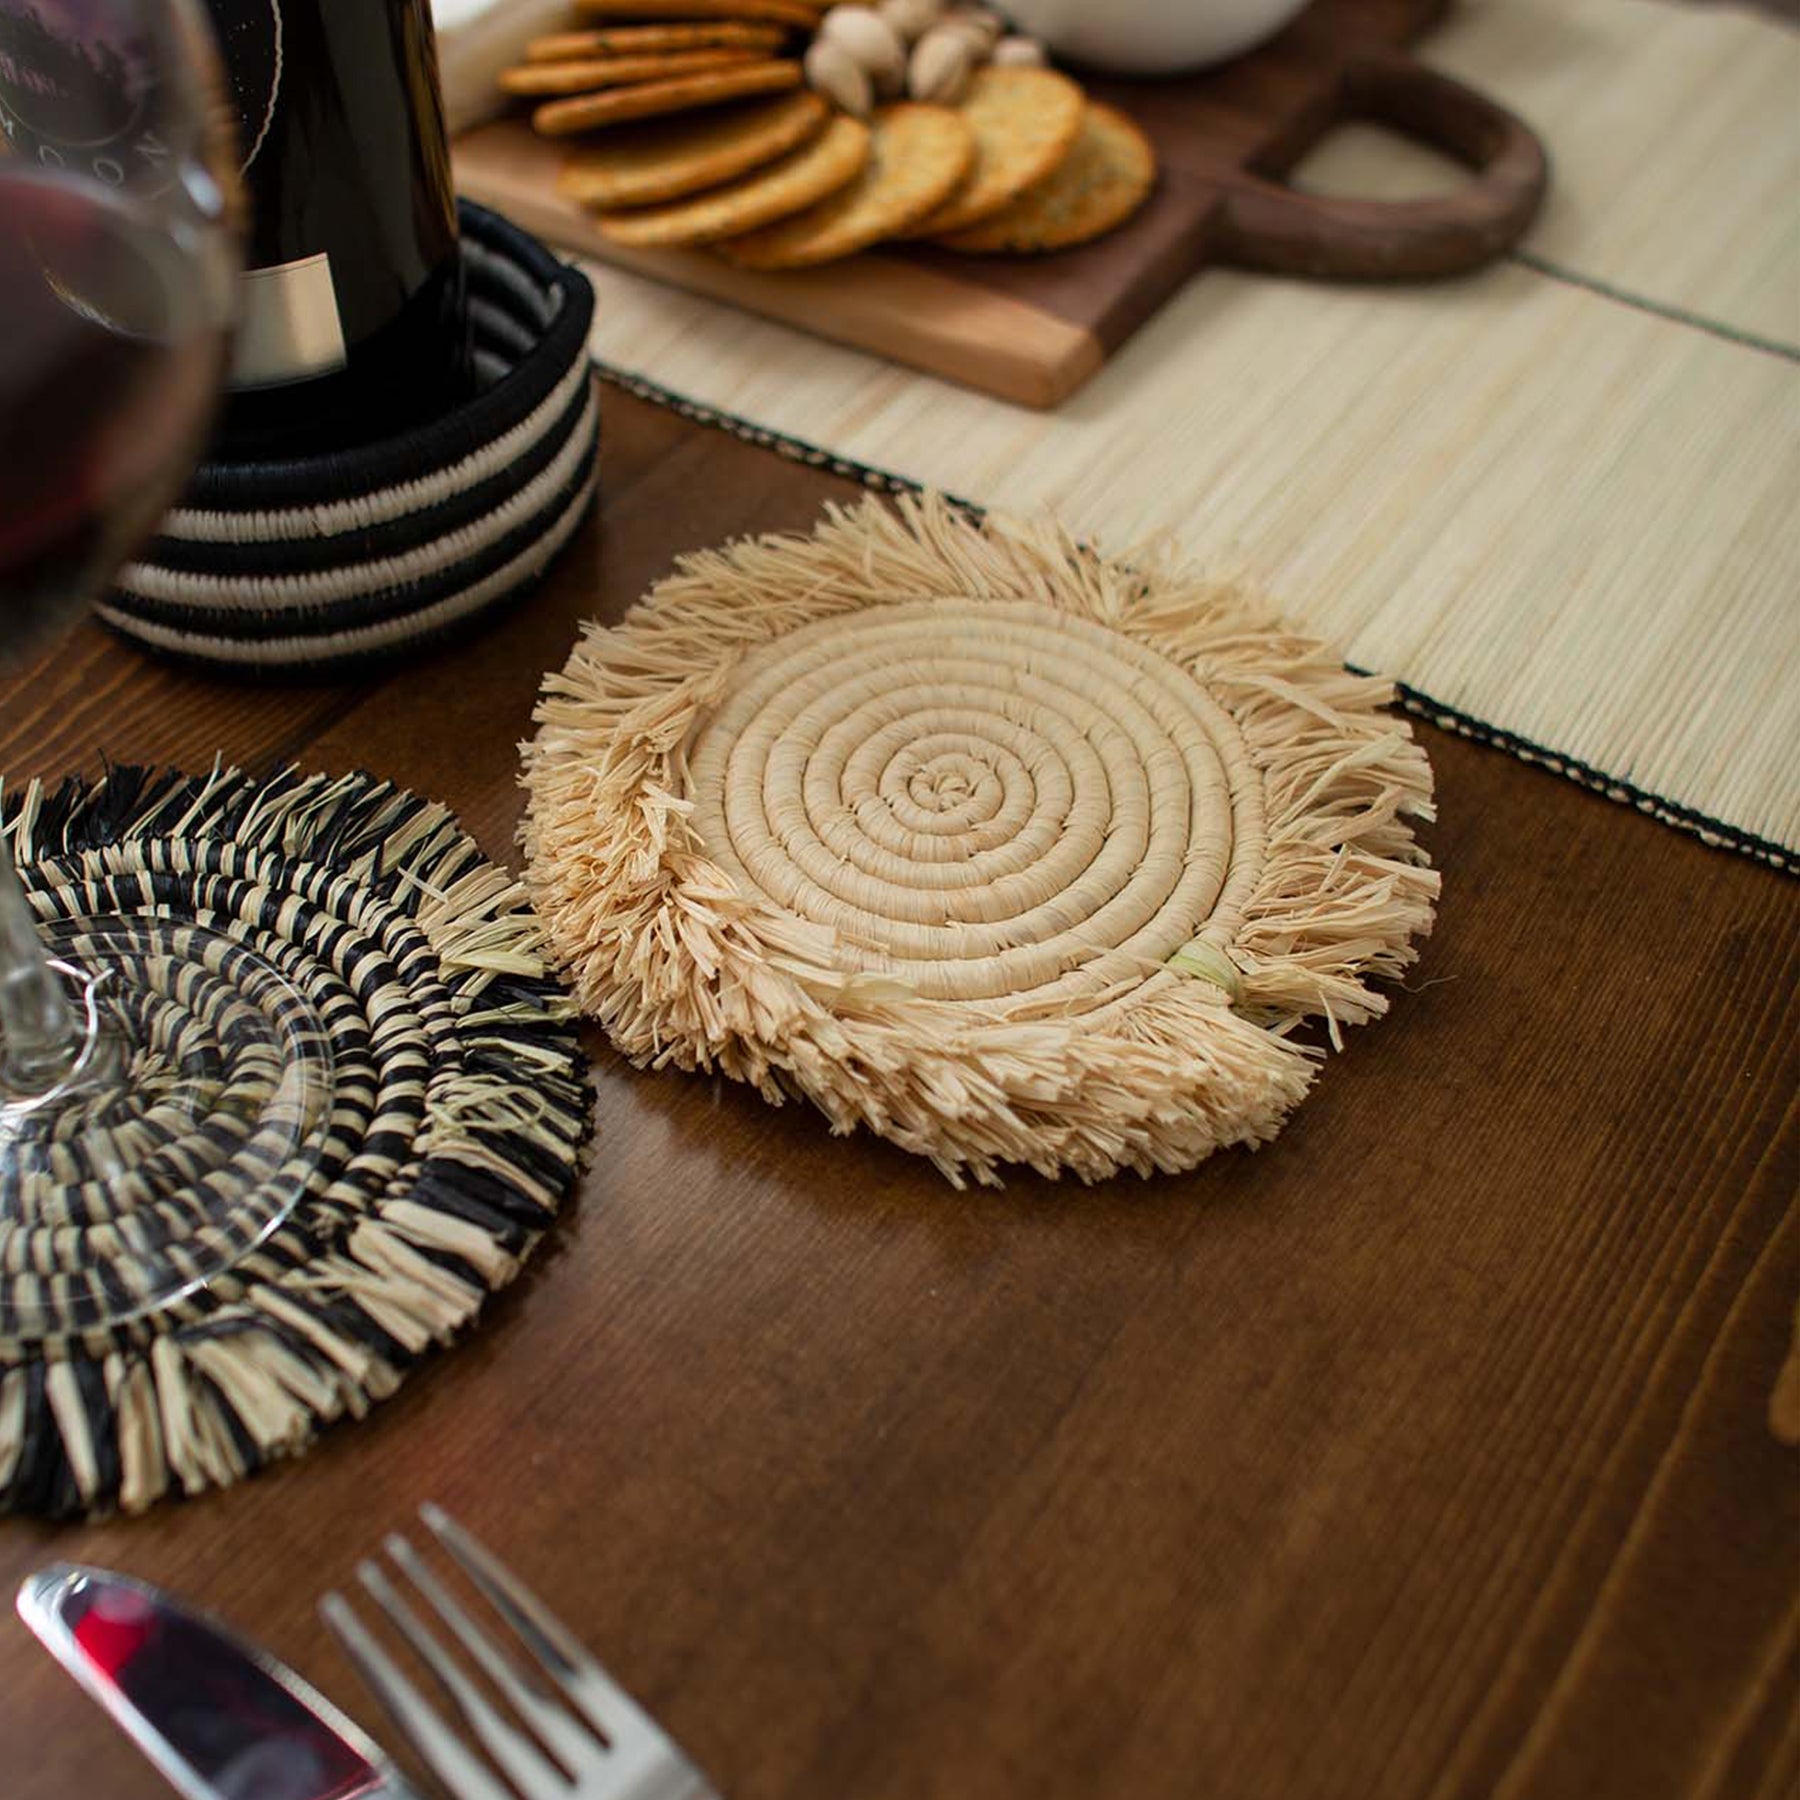  Neutral Fringed Coasters - Natural, Set of 4 by Kazi Goods - Wholesale Kazi Goods - Wholesale Perfumarie